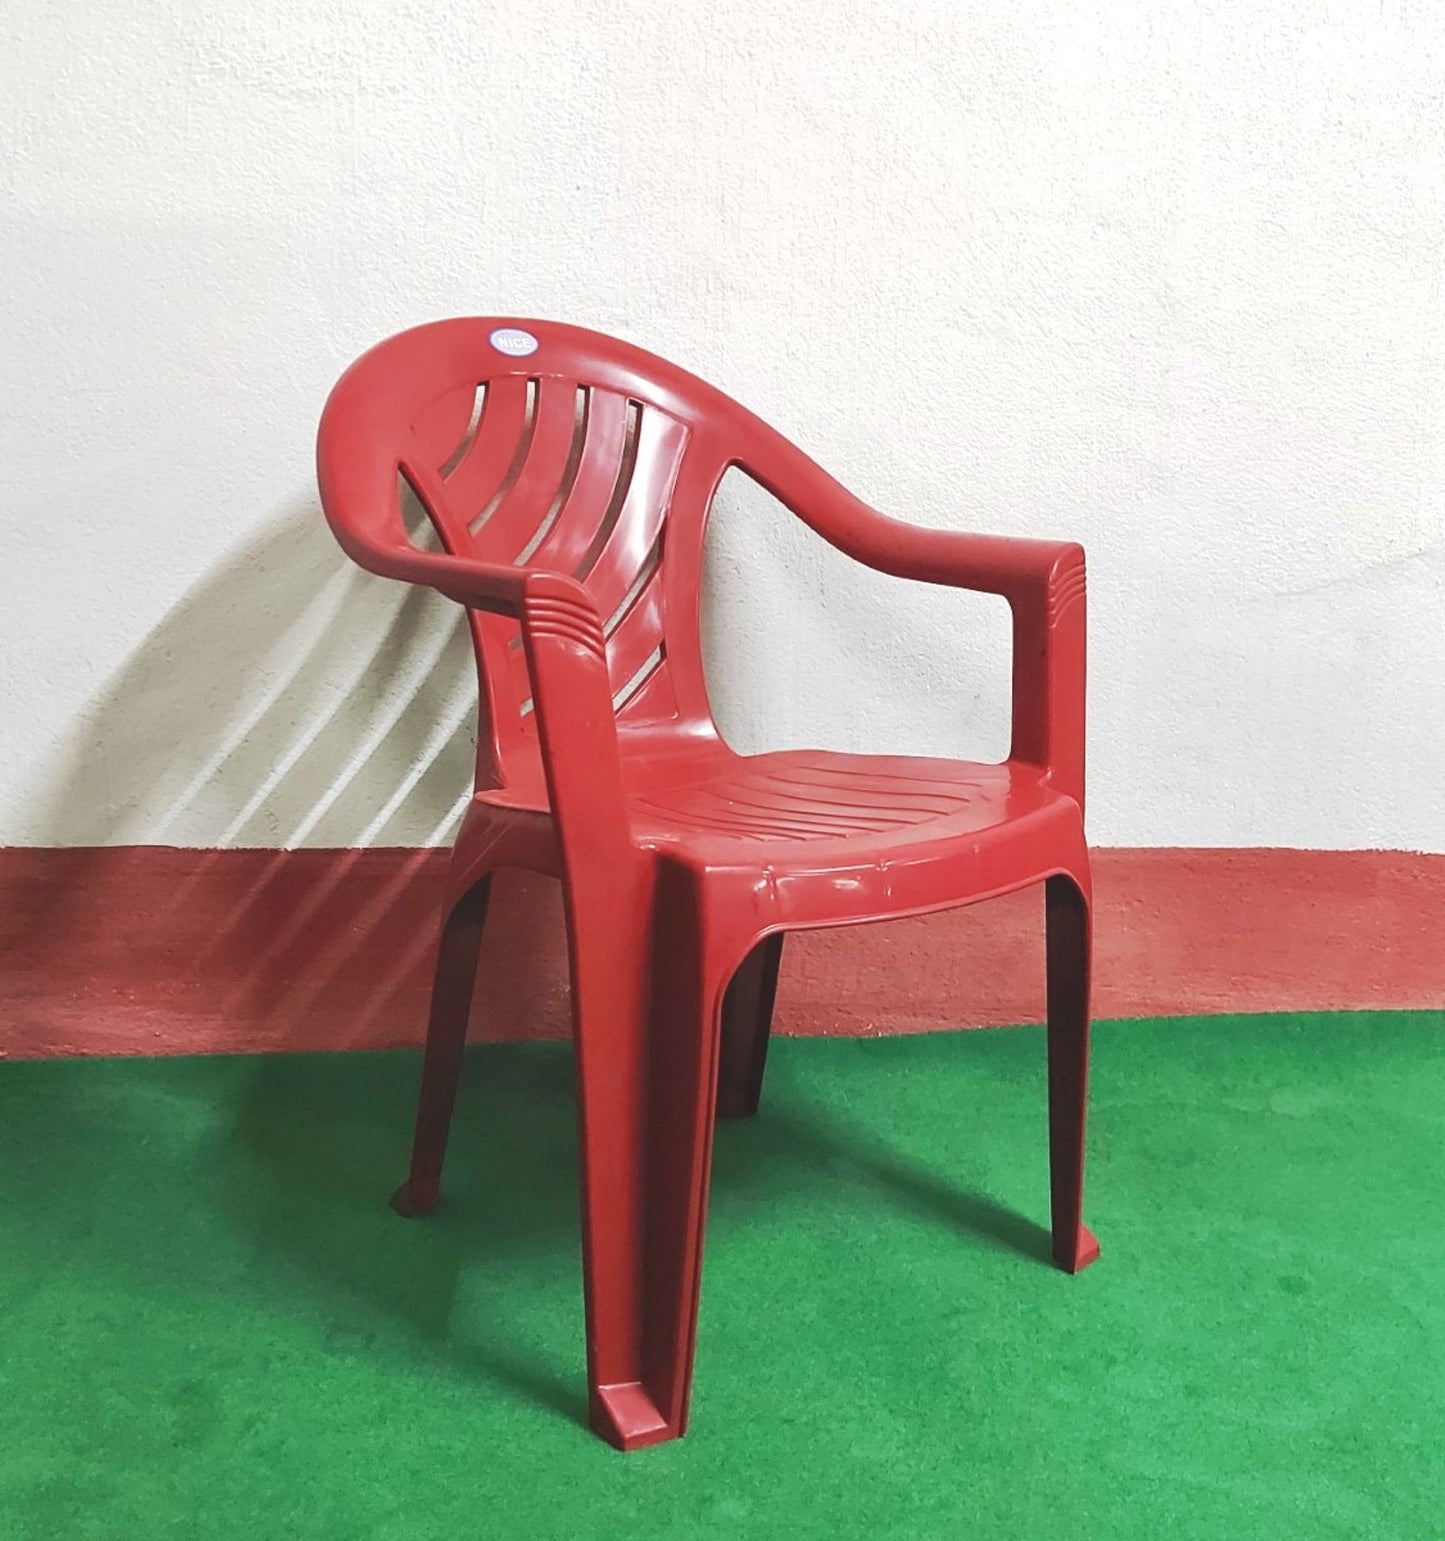 Bowzar Plastic Chair with Arm Red/Maroon